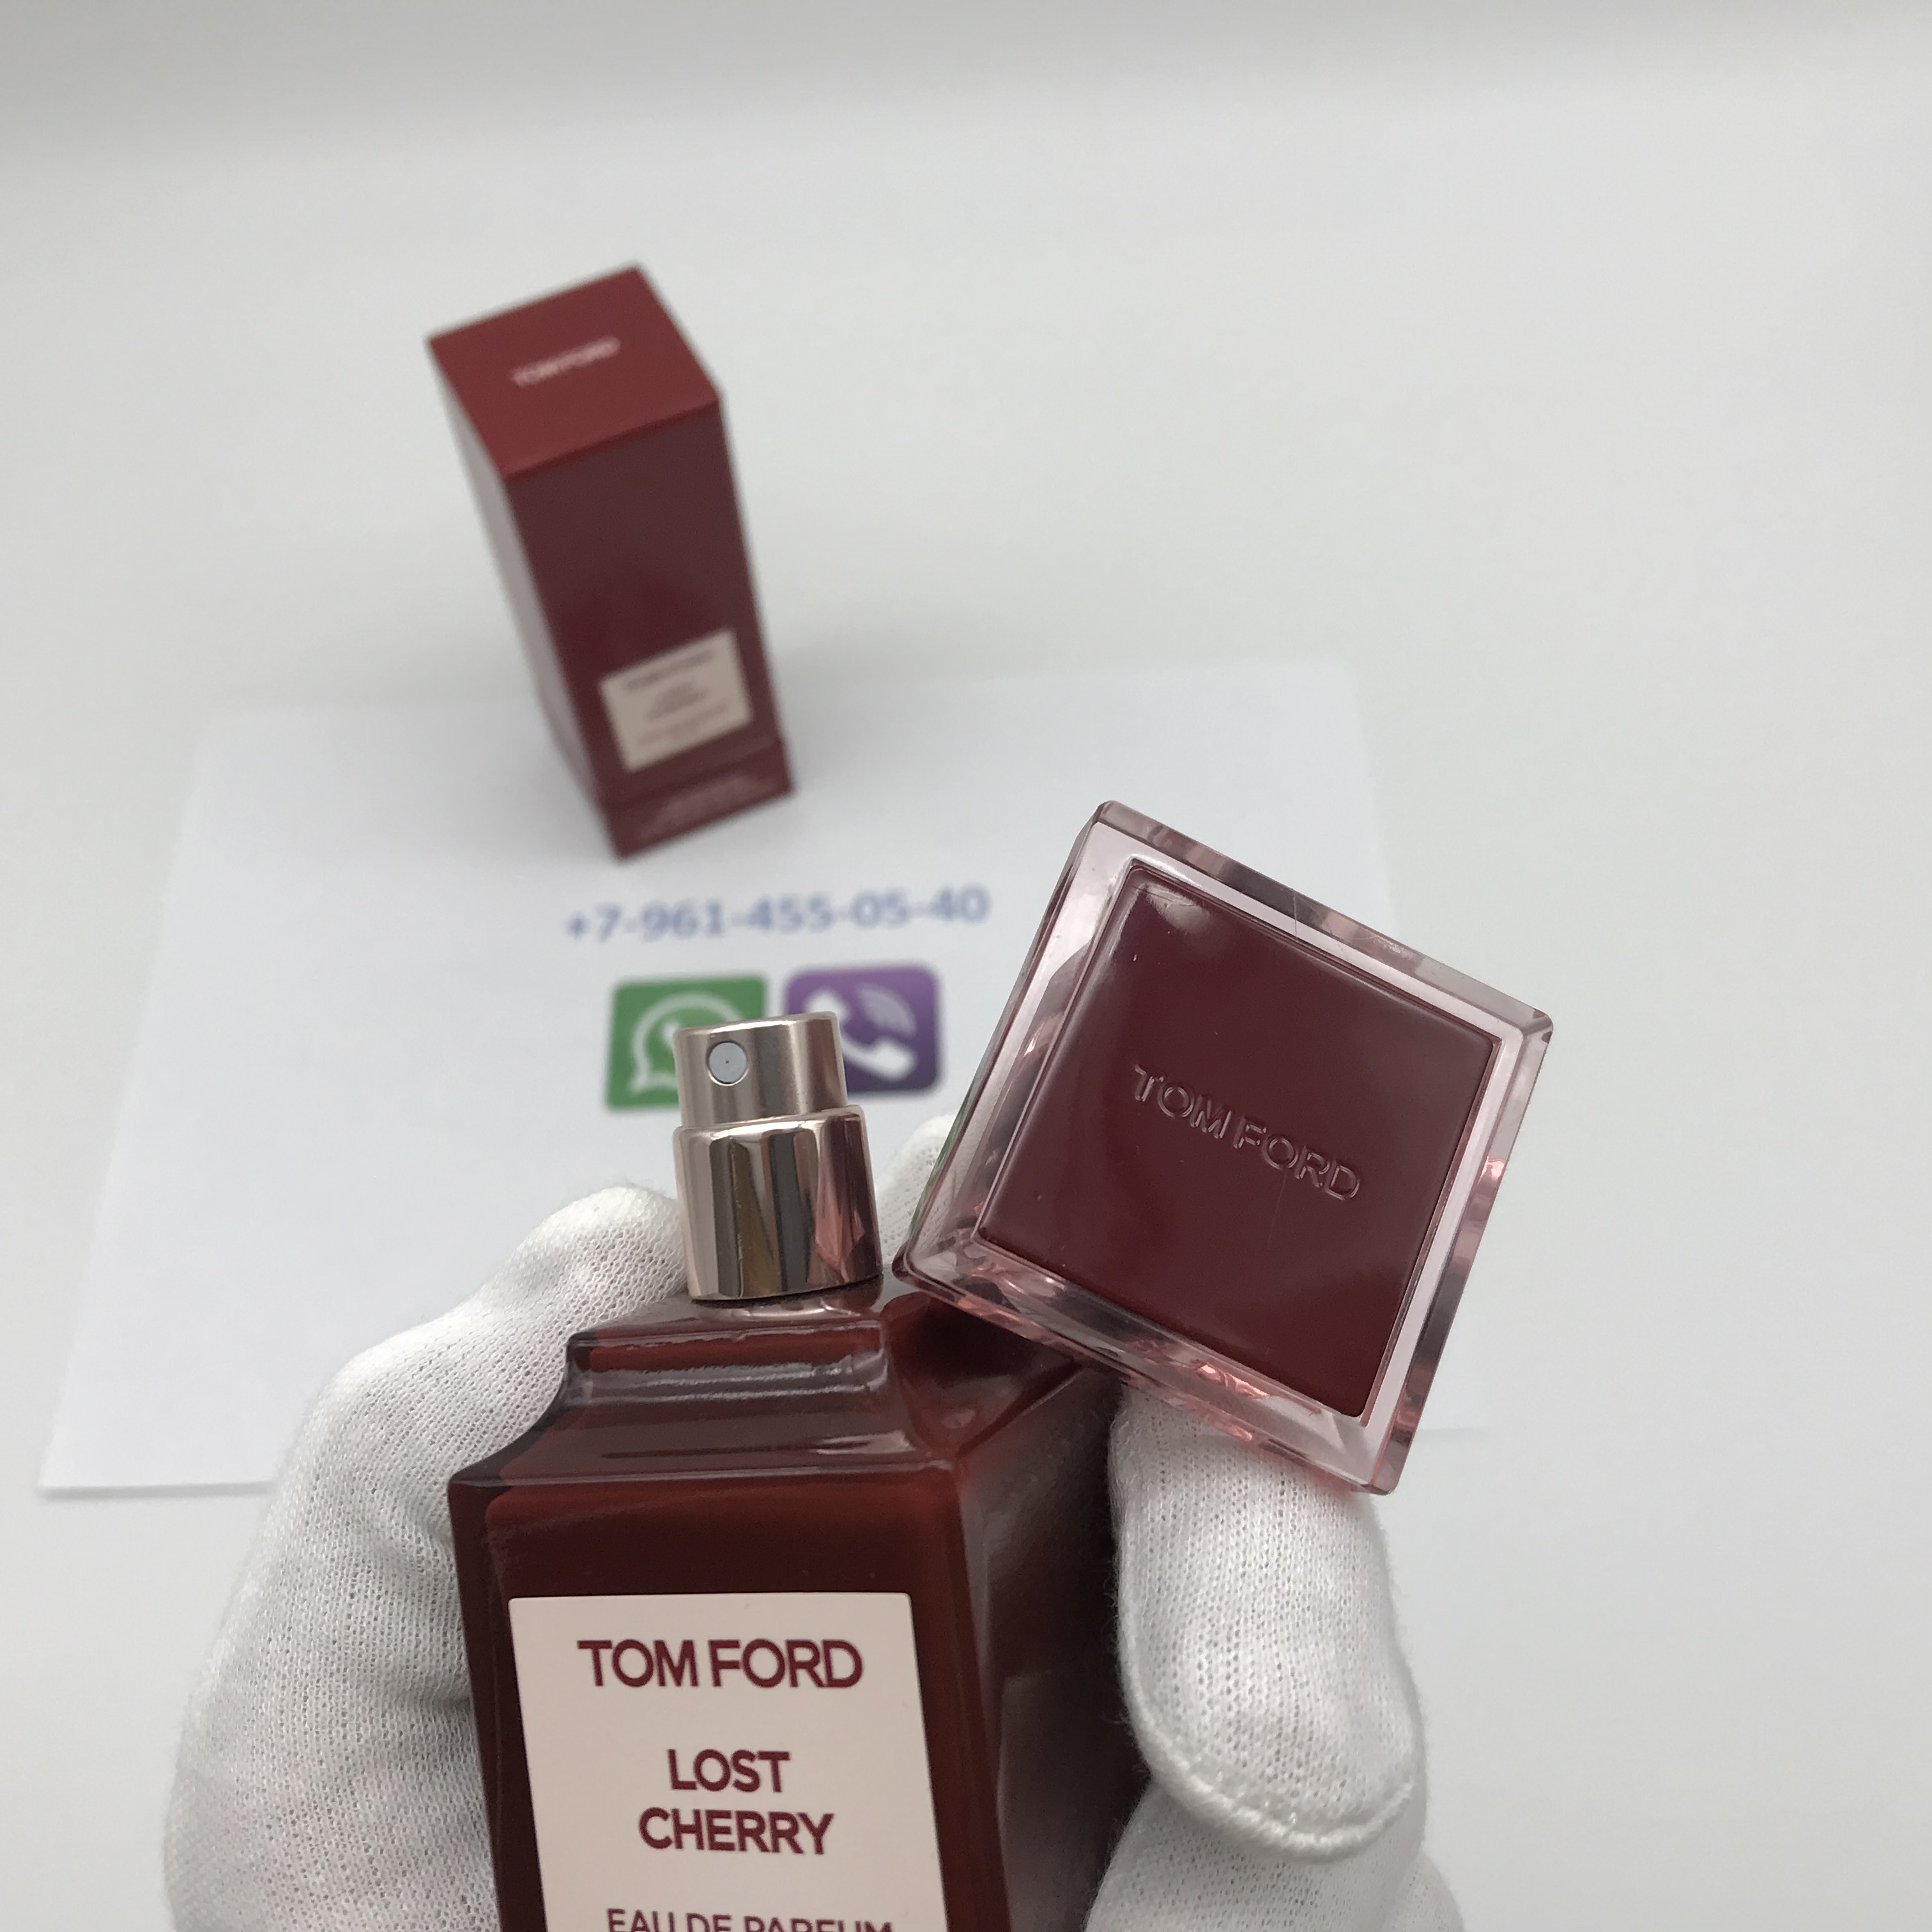 Tom ford lost cherry 50. Tom Ford Lost Cherry 50 мл. Tom Ford Lost Cherry 30ml. Tom Ford Lost Cherry 50 ml оригинал. Tom Ford Cherry 30ml.